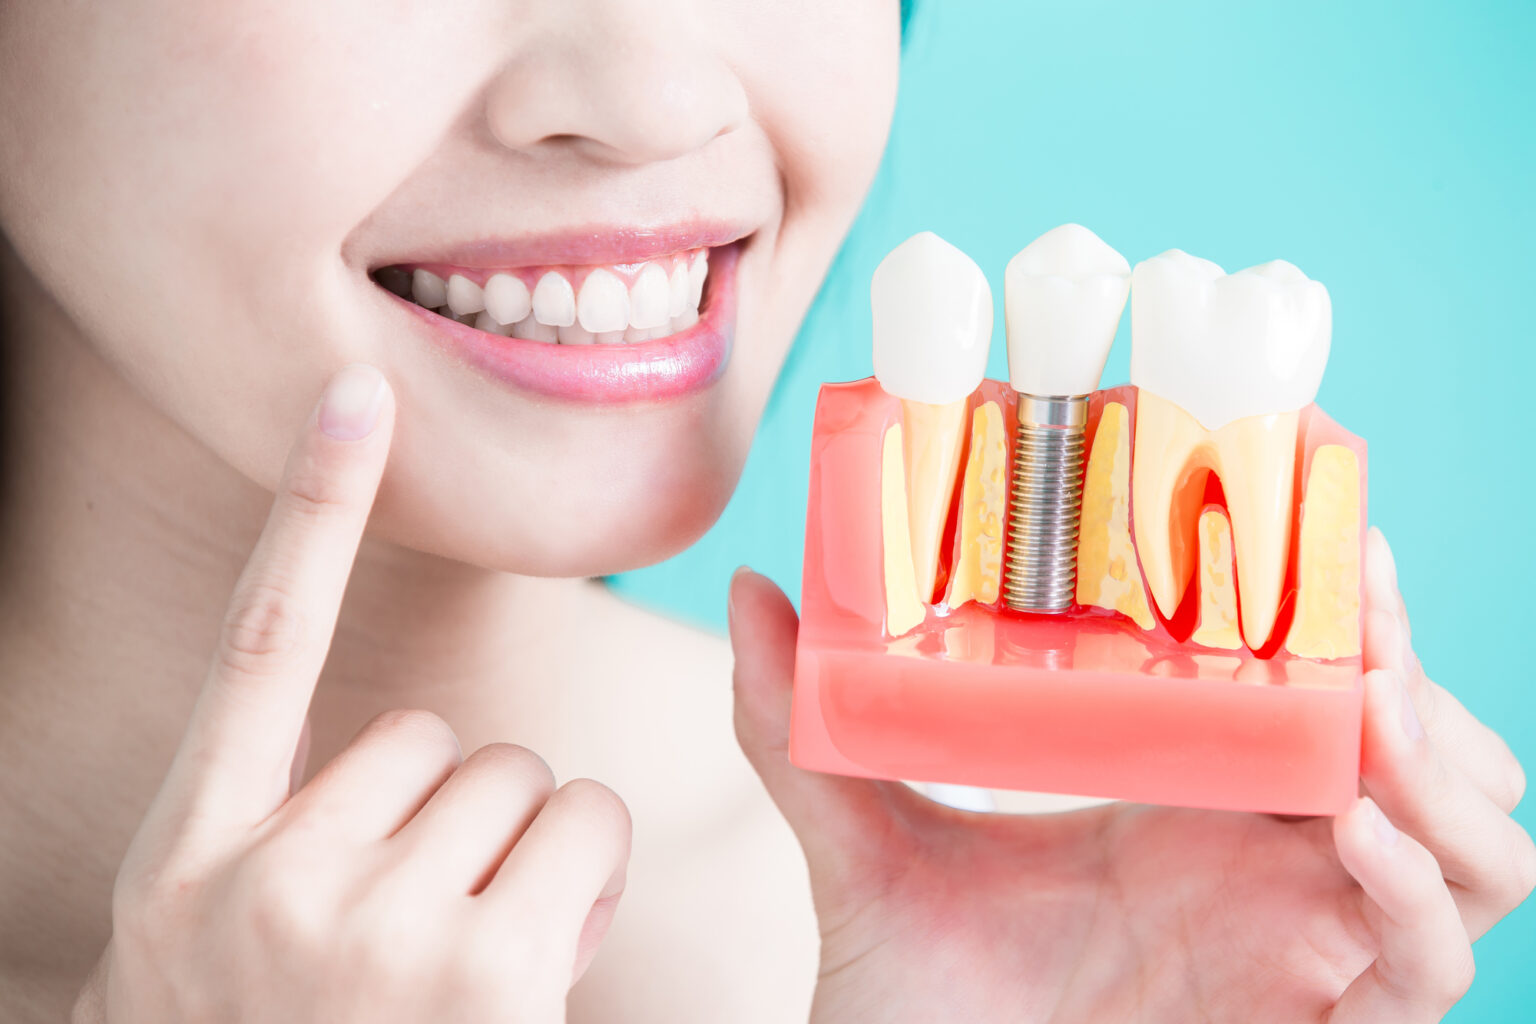 Woman pointing to her smile, holding a dental implant model in a dental clinic.